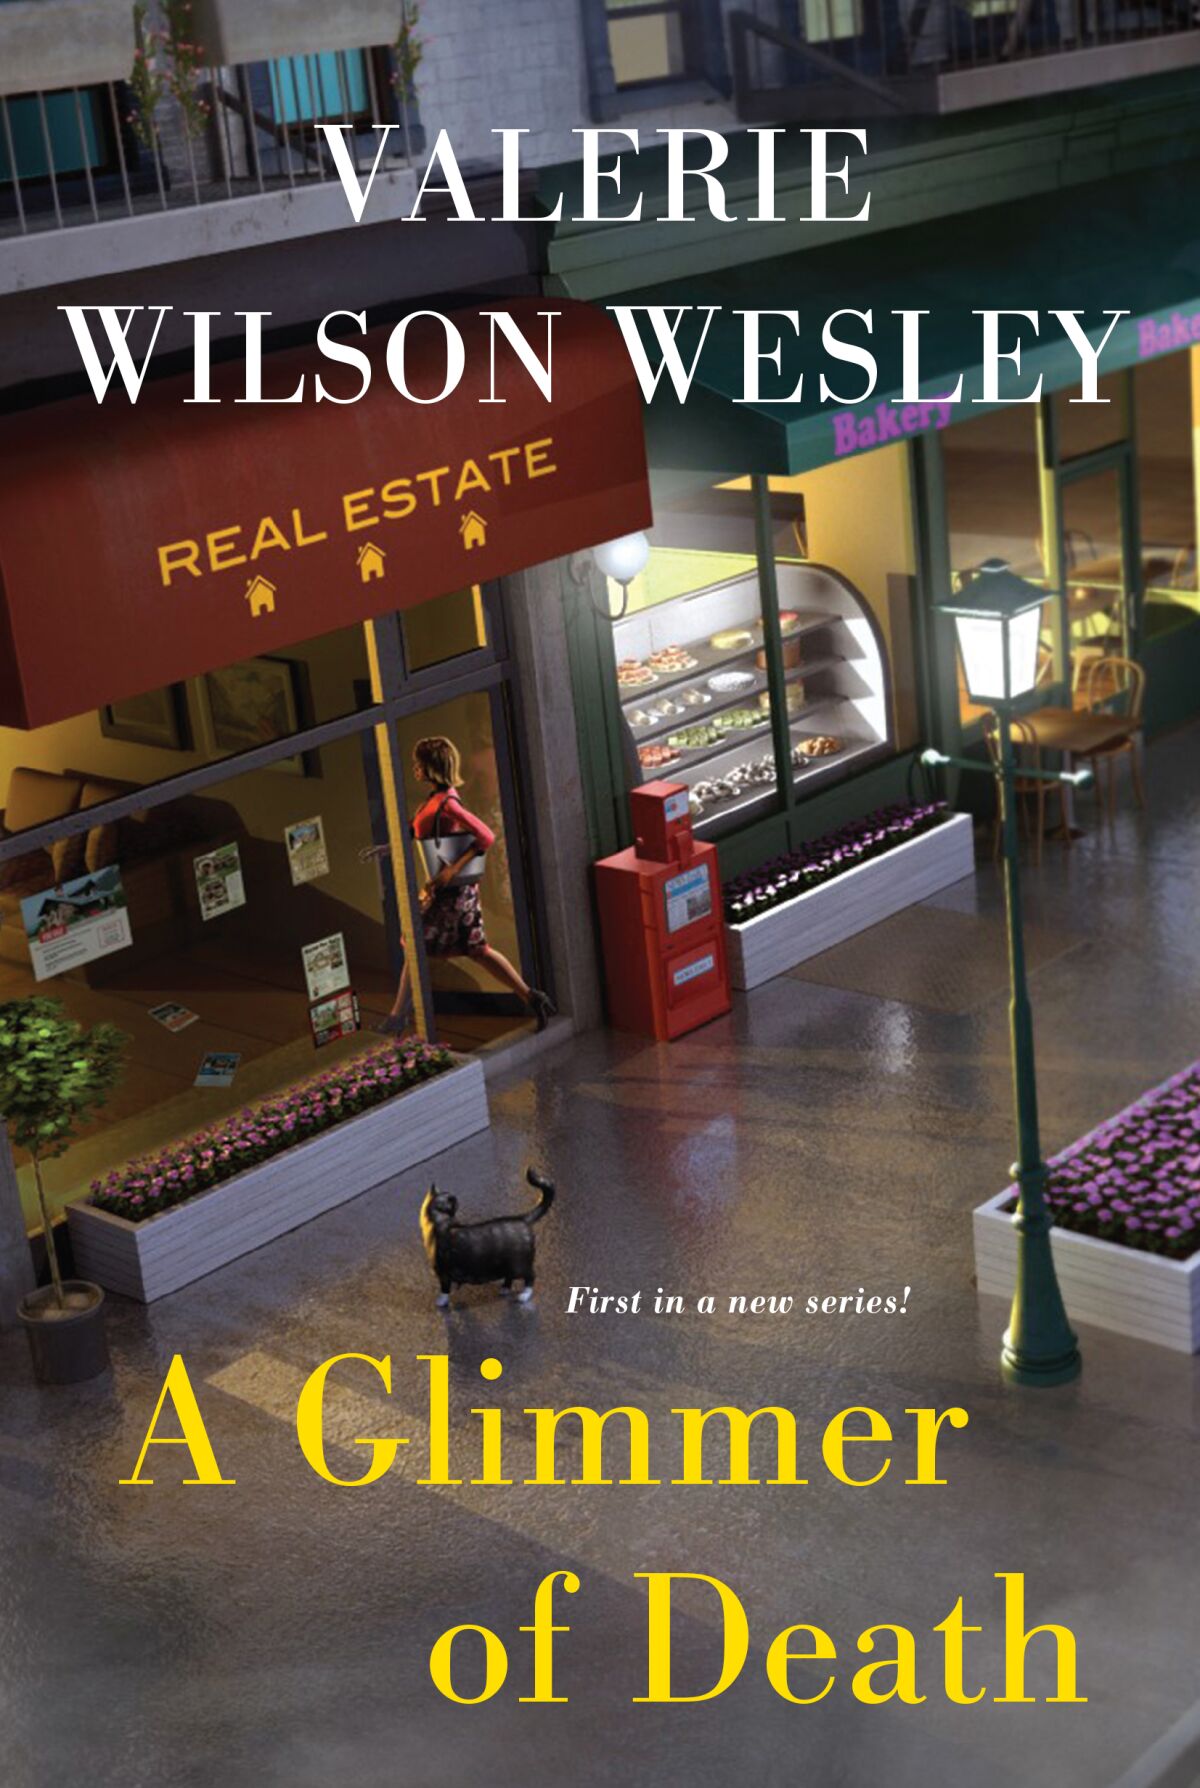 "A Glimmer of Death" by Valerie Wilson Wesley